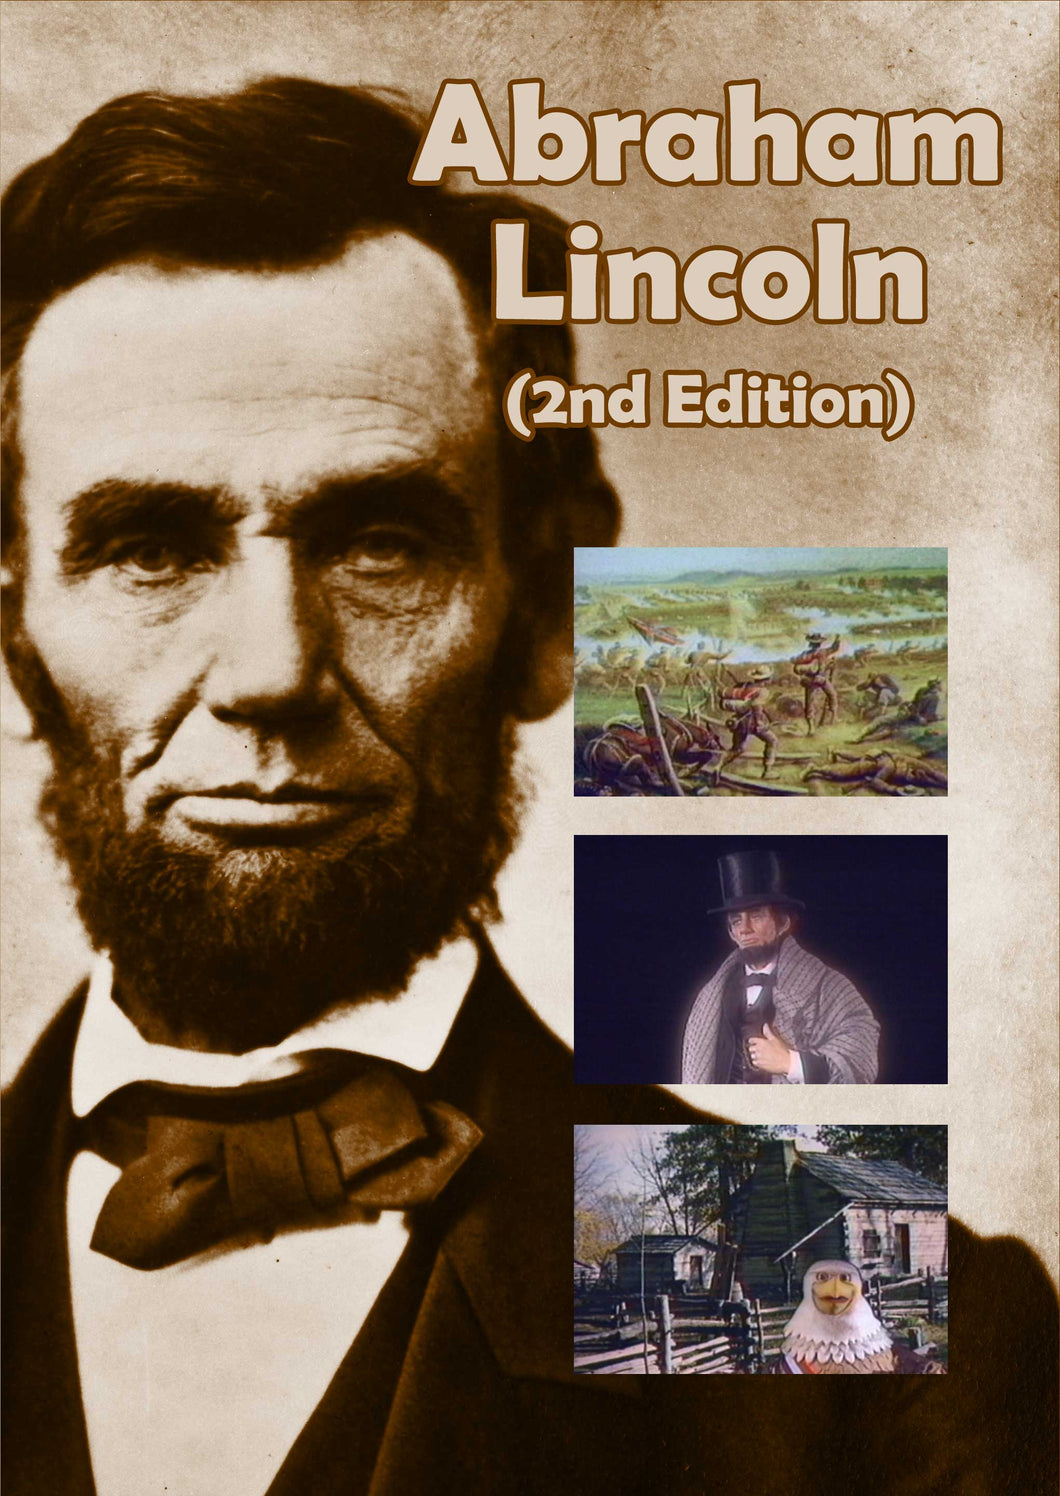 Abraham Lincoln (2nd Ed.)